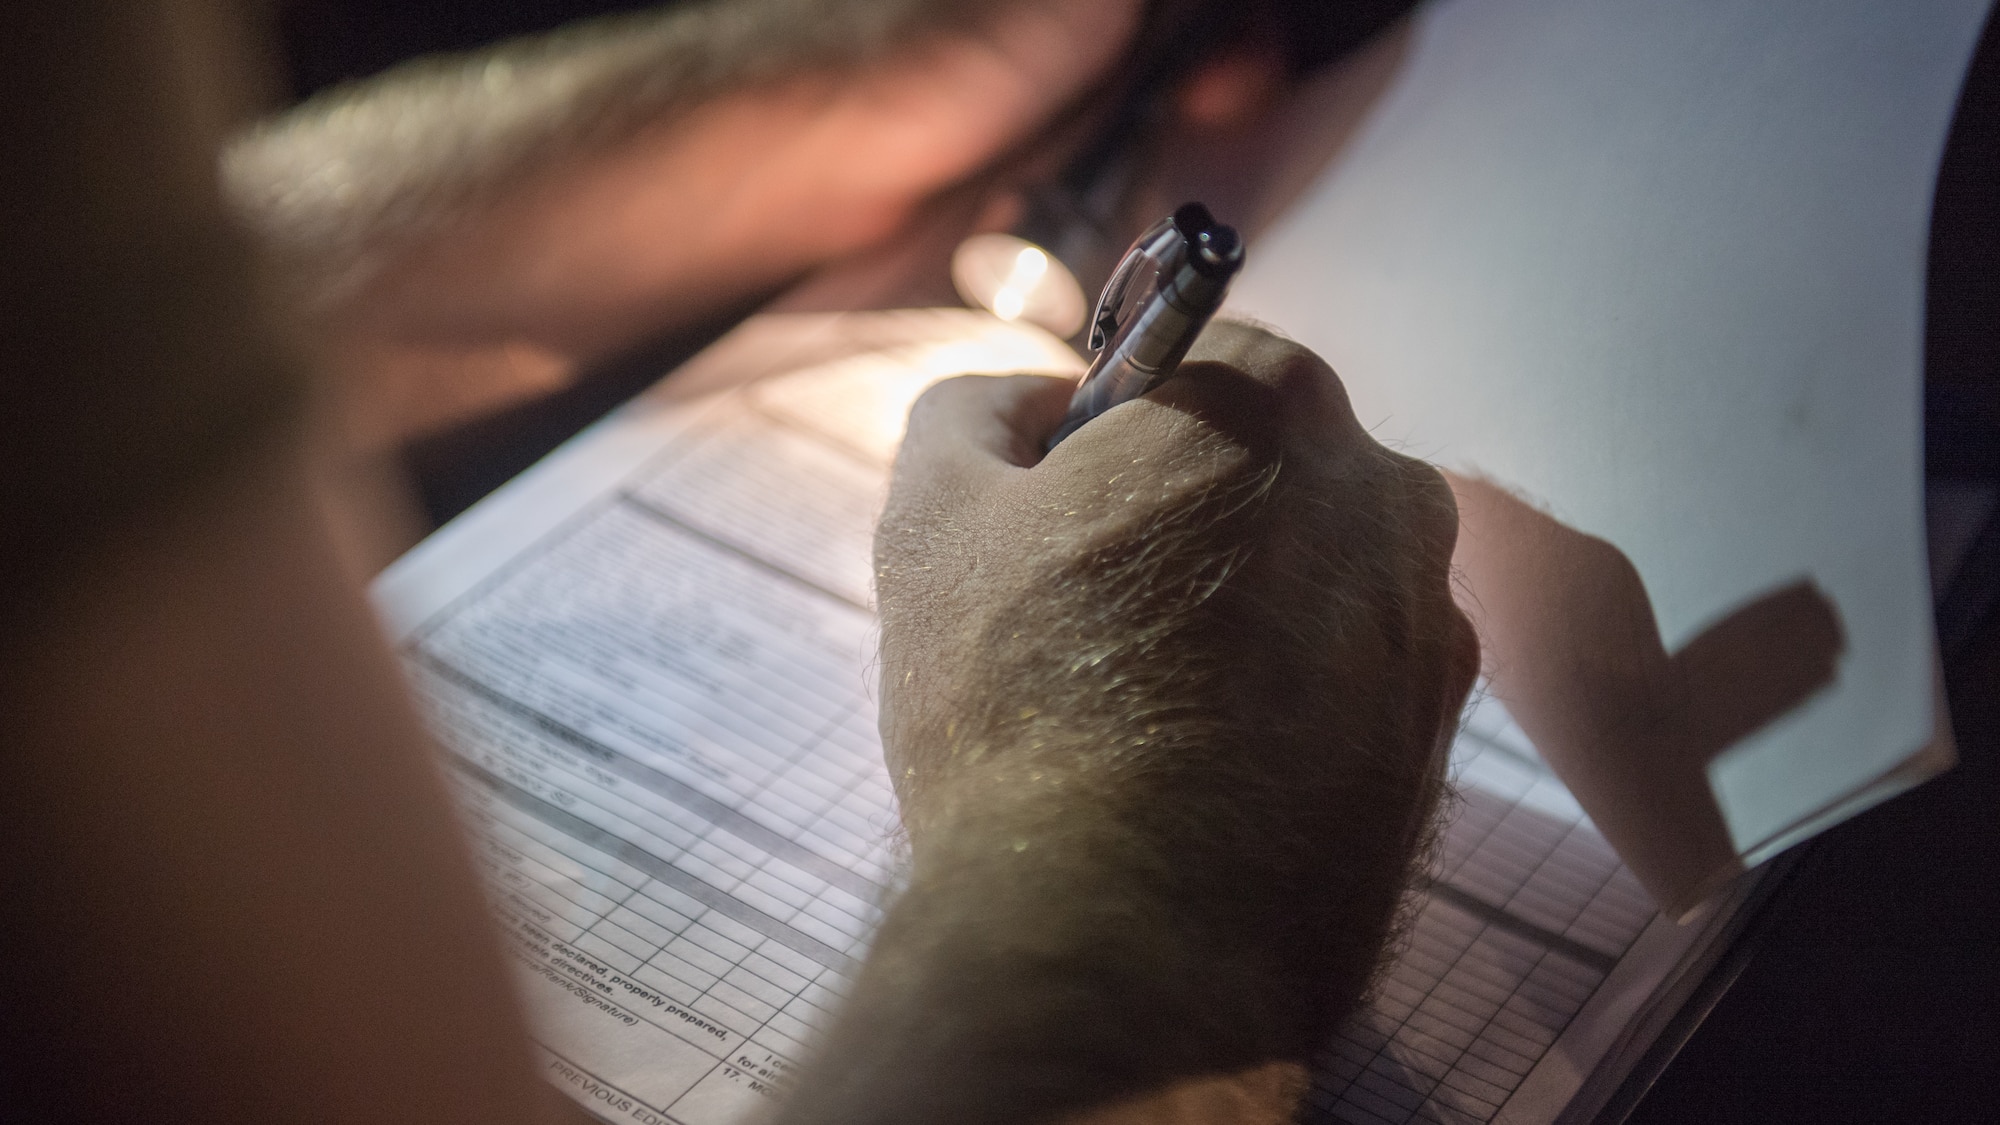 U.S. Air Force Staff Sgt. Steven Gentry, 386th Expeditionary Logistics Readiness Squadron special handling lead joint inspector, takes notes while inspecting a U.S. Army UH-60 Black Hawk helicopter at Ali al Salem Air Base, Kuwait, Aug. 9, 2019. A team of Airmen and Soldiers inspect the Black Hawks to ensure they're airworthy to load onto U.S. Air Force C-17 Globemaster III aircraft where they'll undergo transport to a location within the U.S. Central Command area of responsibility. (U.S. Air Force photo by Tech. Sgt. Daniel Martinez)